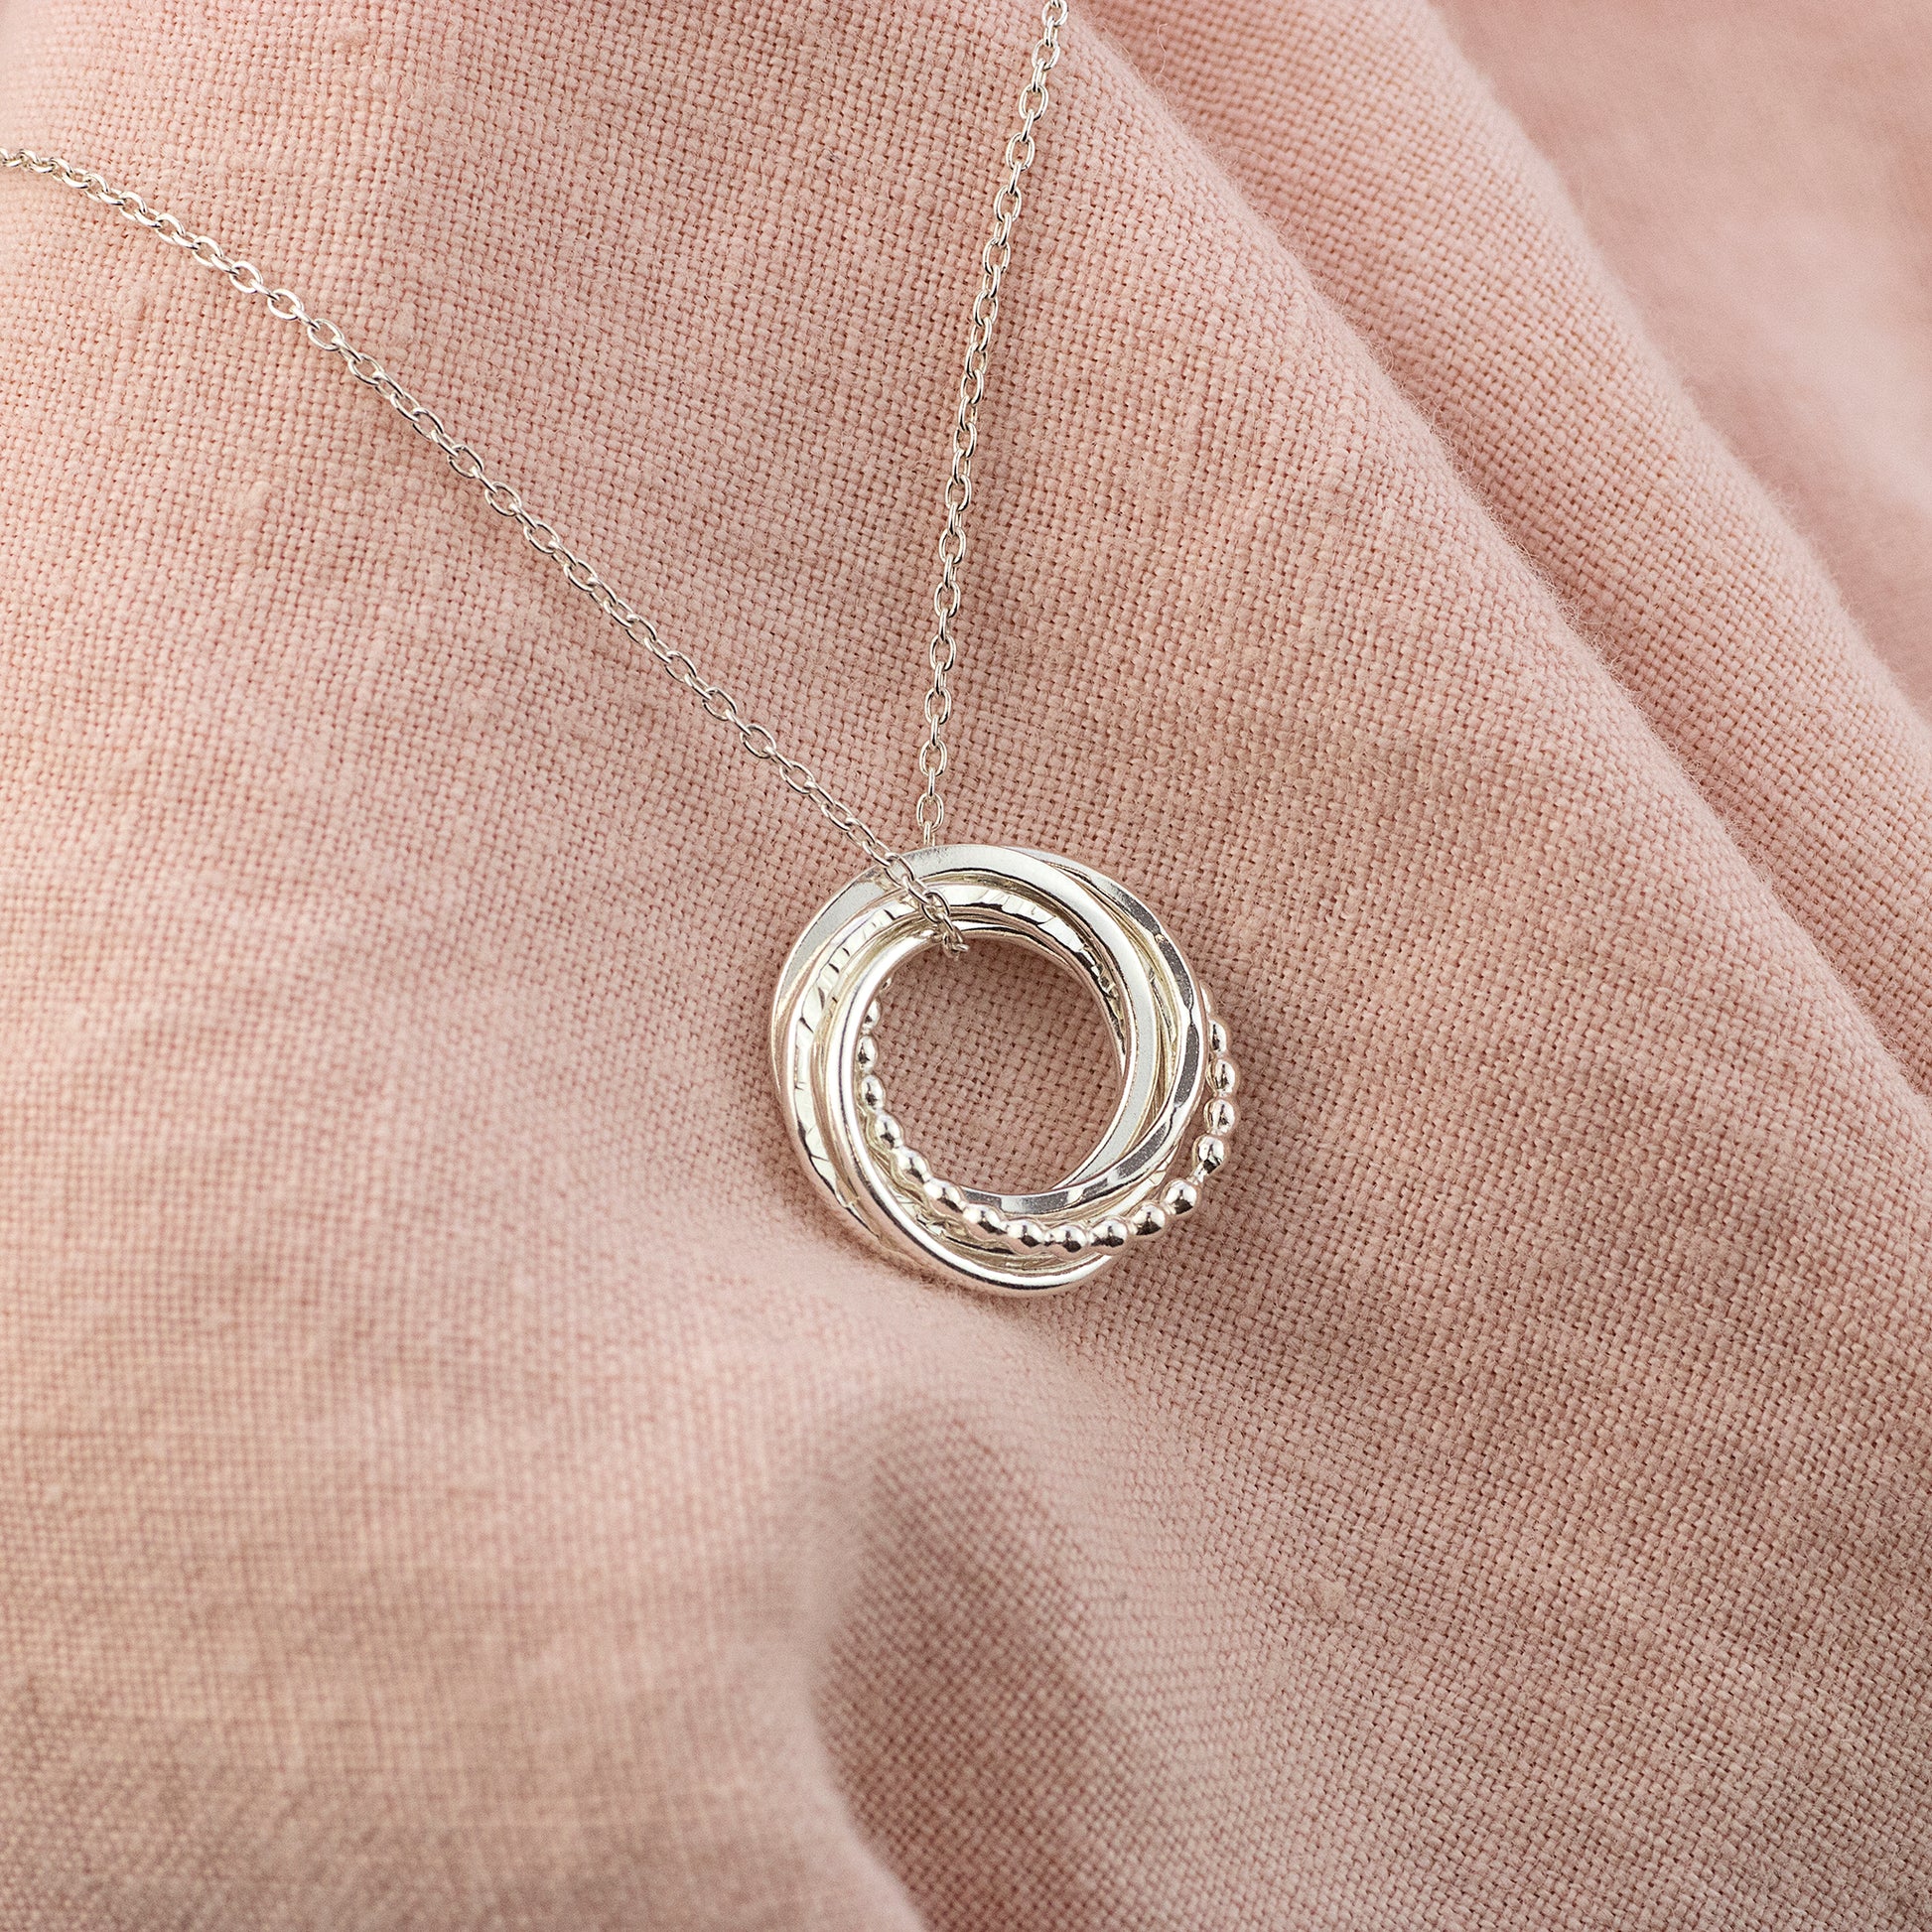 6th Anniversary Necklace - The Original 6 Rings for 6 Years Necklace - Petite Silver